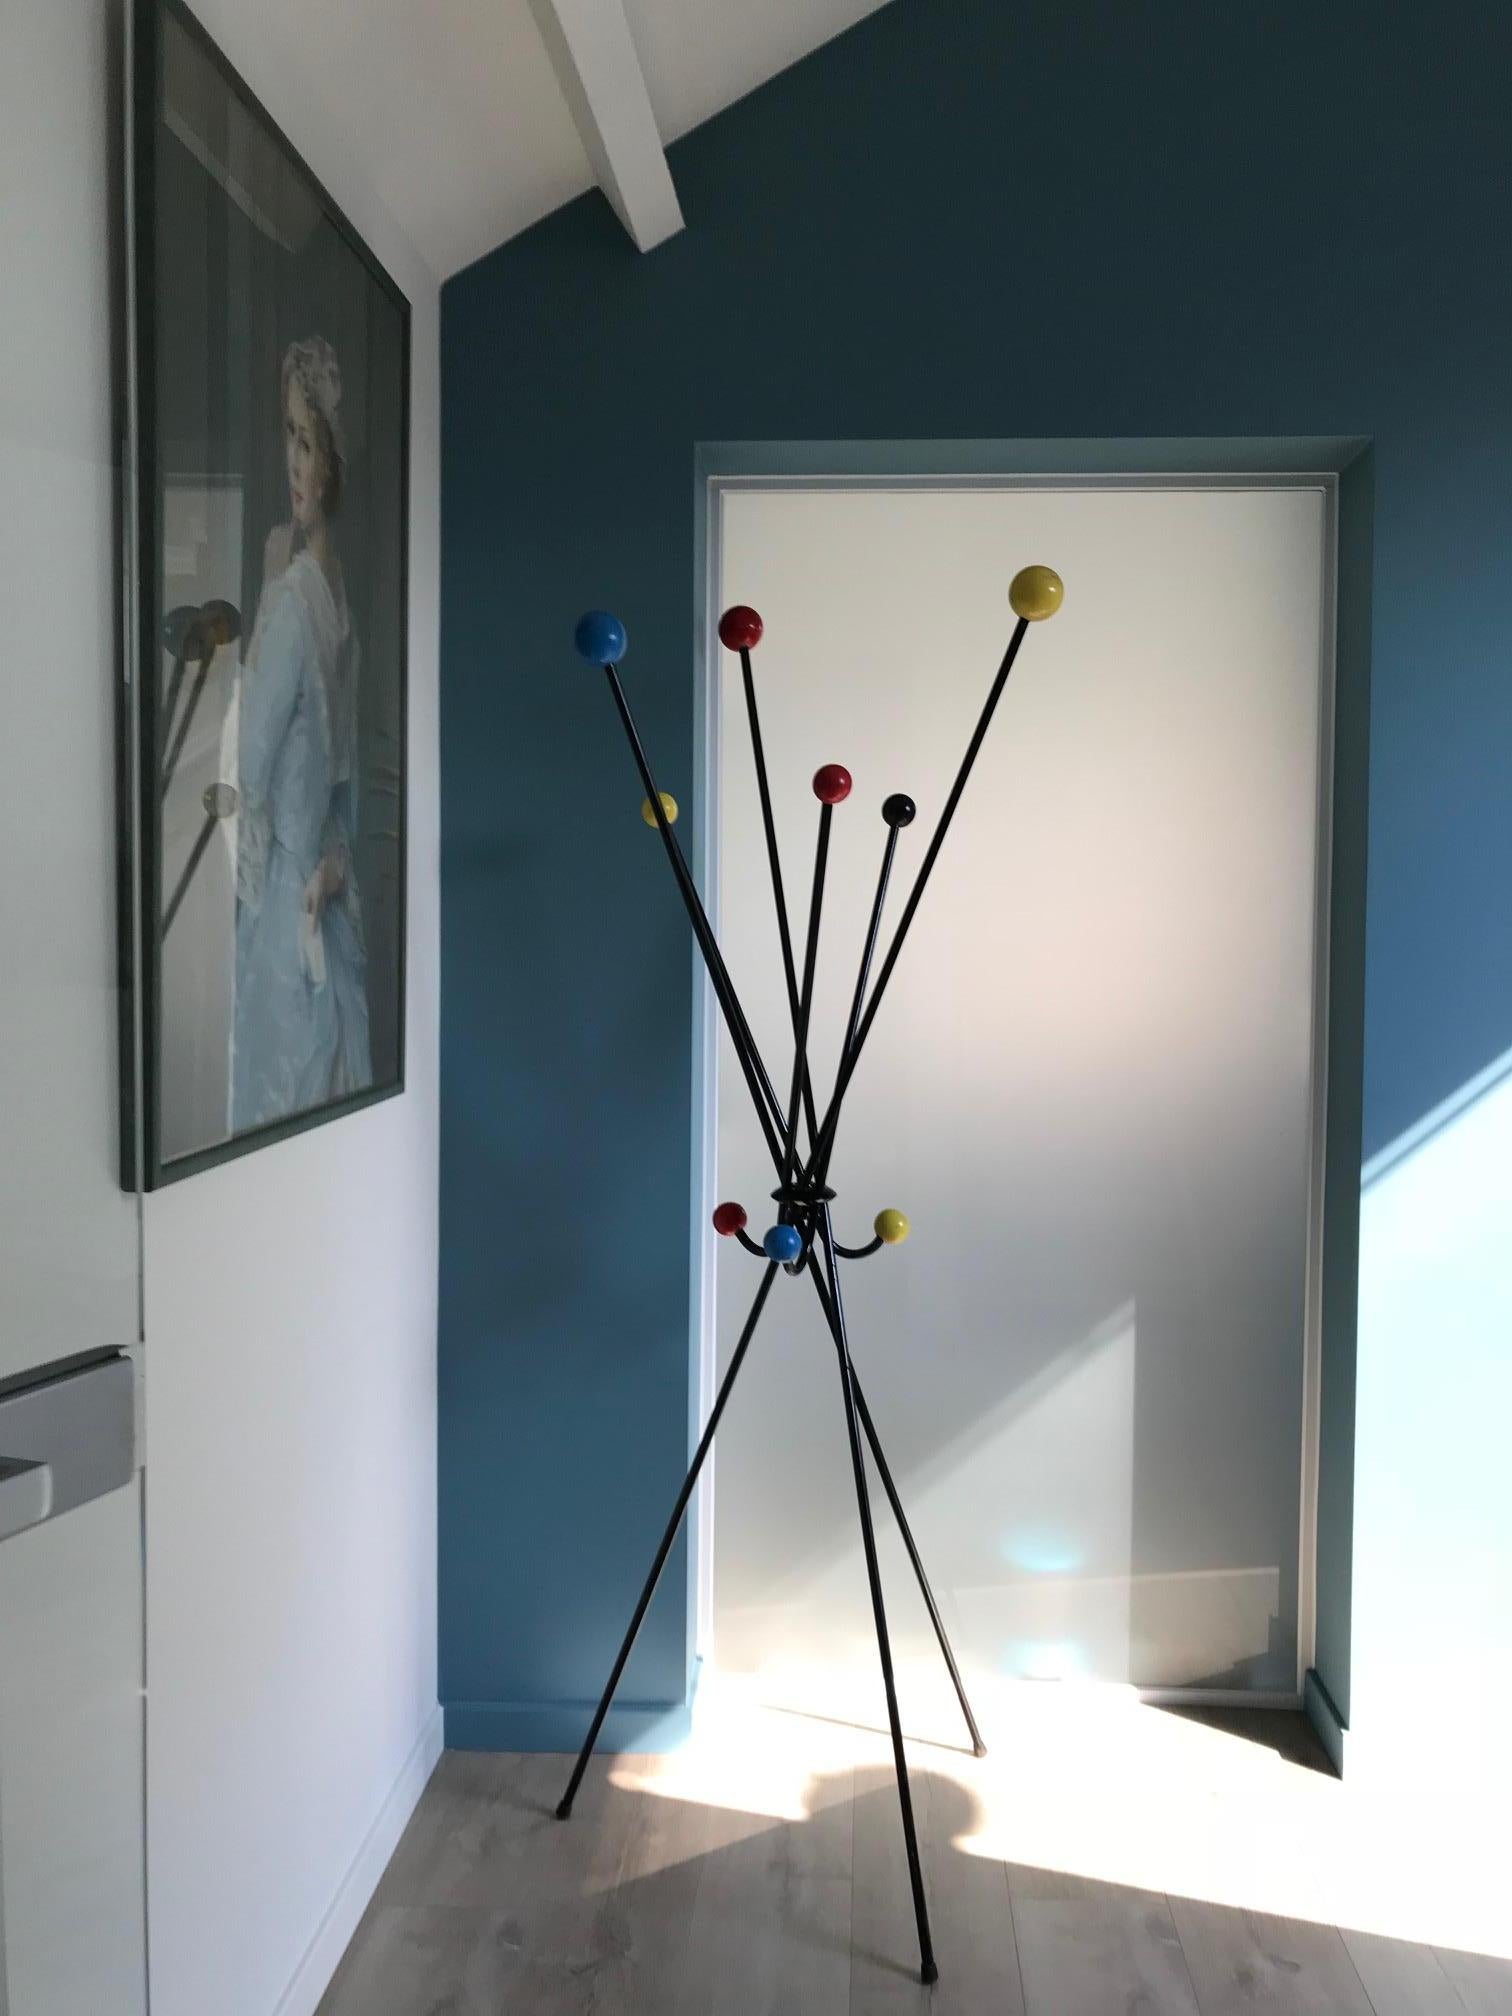 Spectacular multi-color atomic coat stand signed 'Fontana'.

This remarkable coat stand has 6 balls at the top and 3 in the middle.

Suitable for hats, coats, etc...

It is a statement piece for your hallway or bedroom, it really gives a